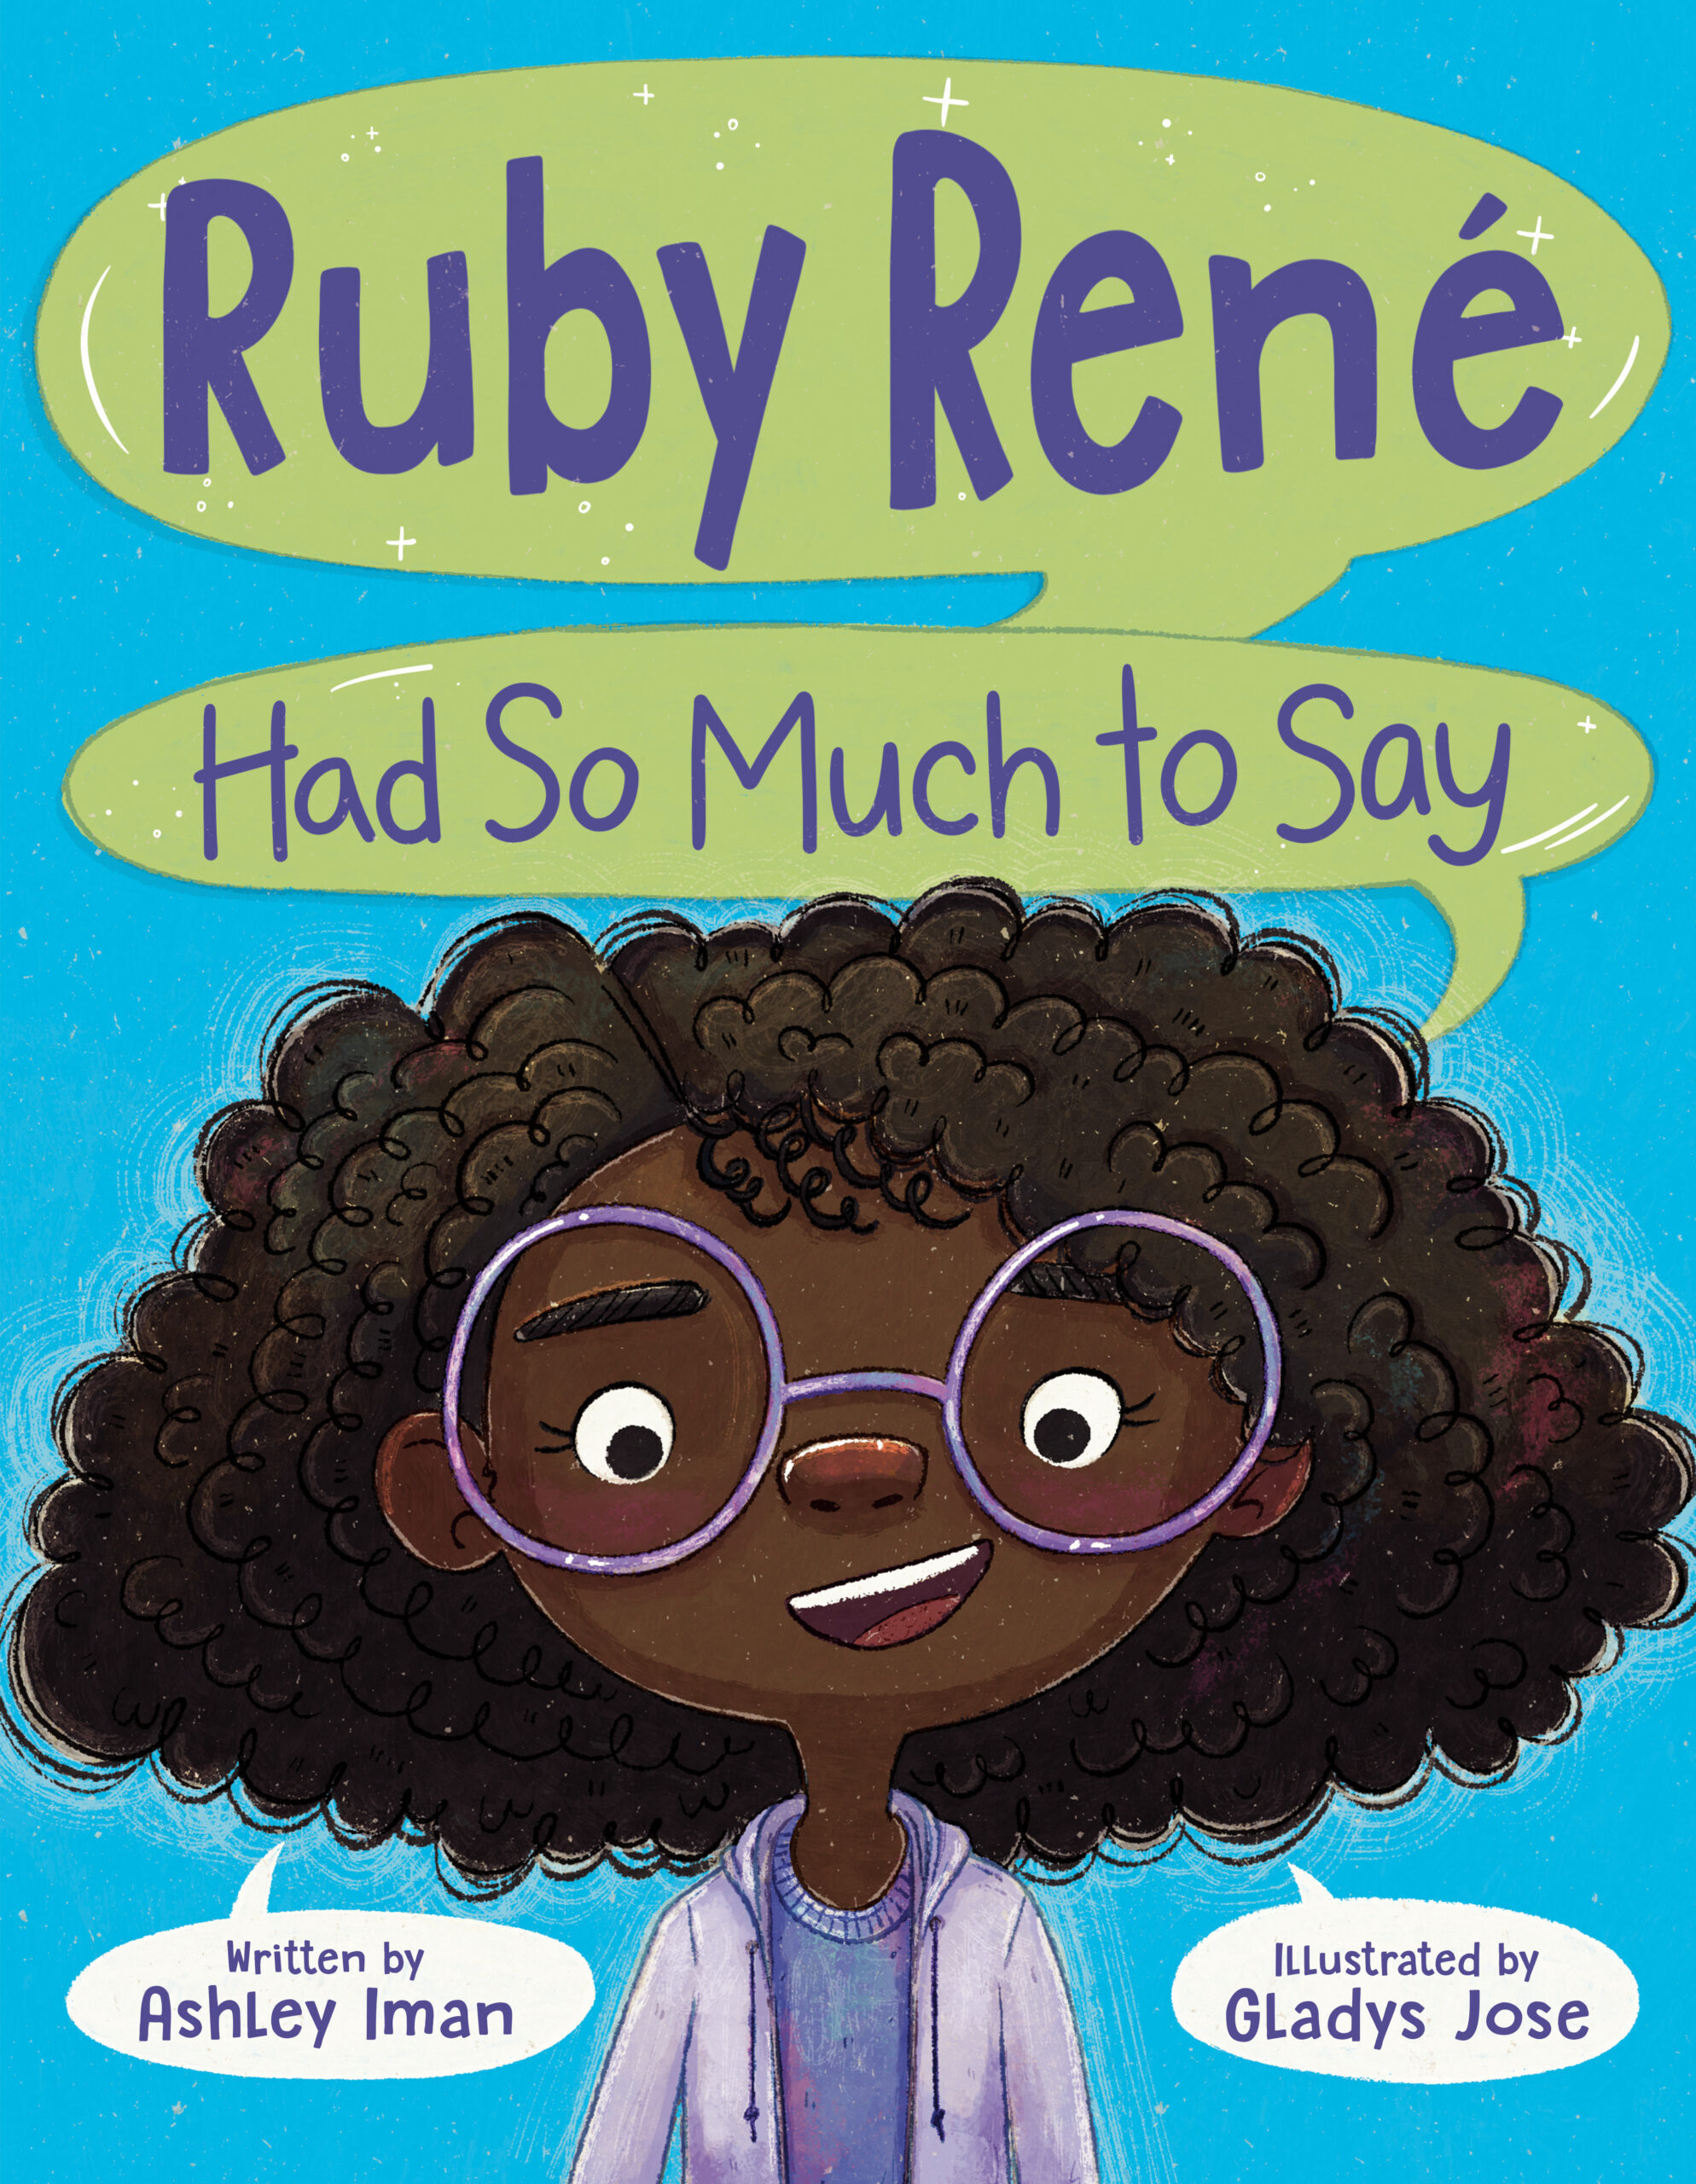 Ruby reneé had so much to say interview with ashley iman. Successful black parenting magazine